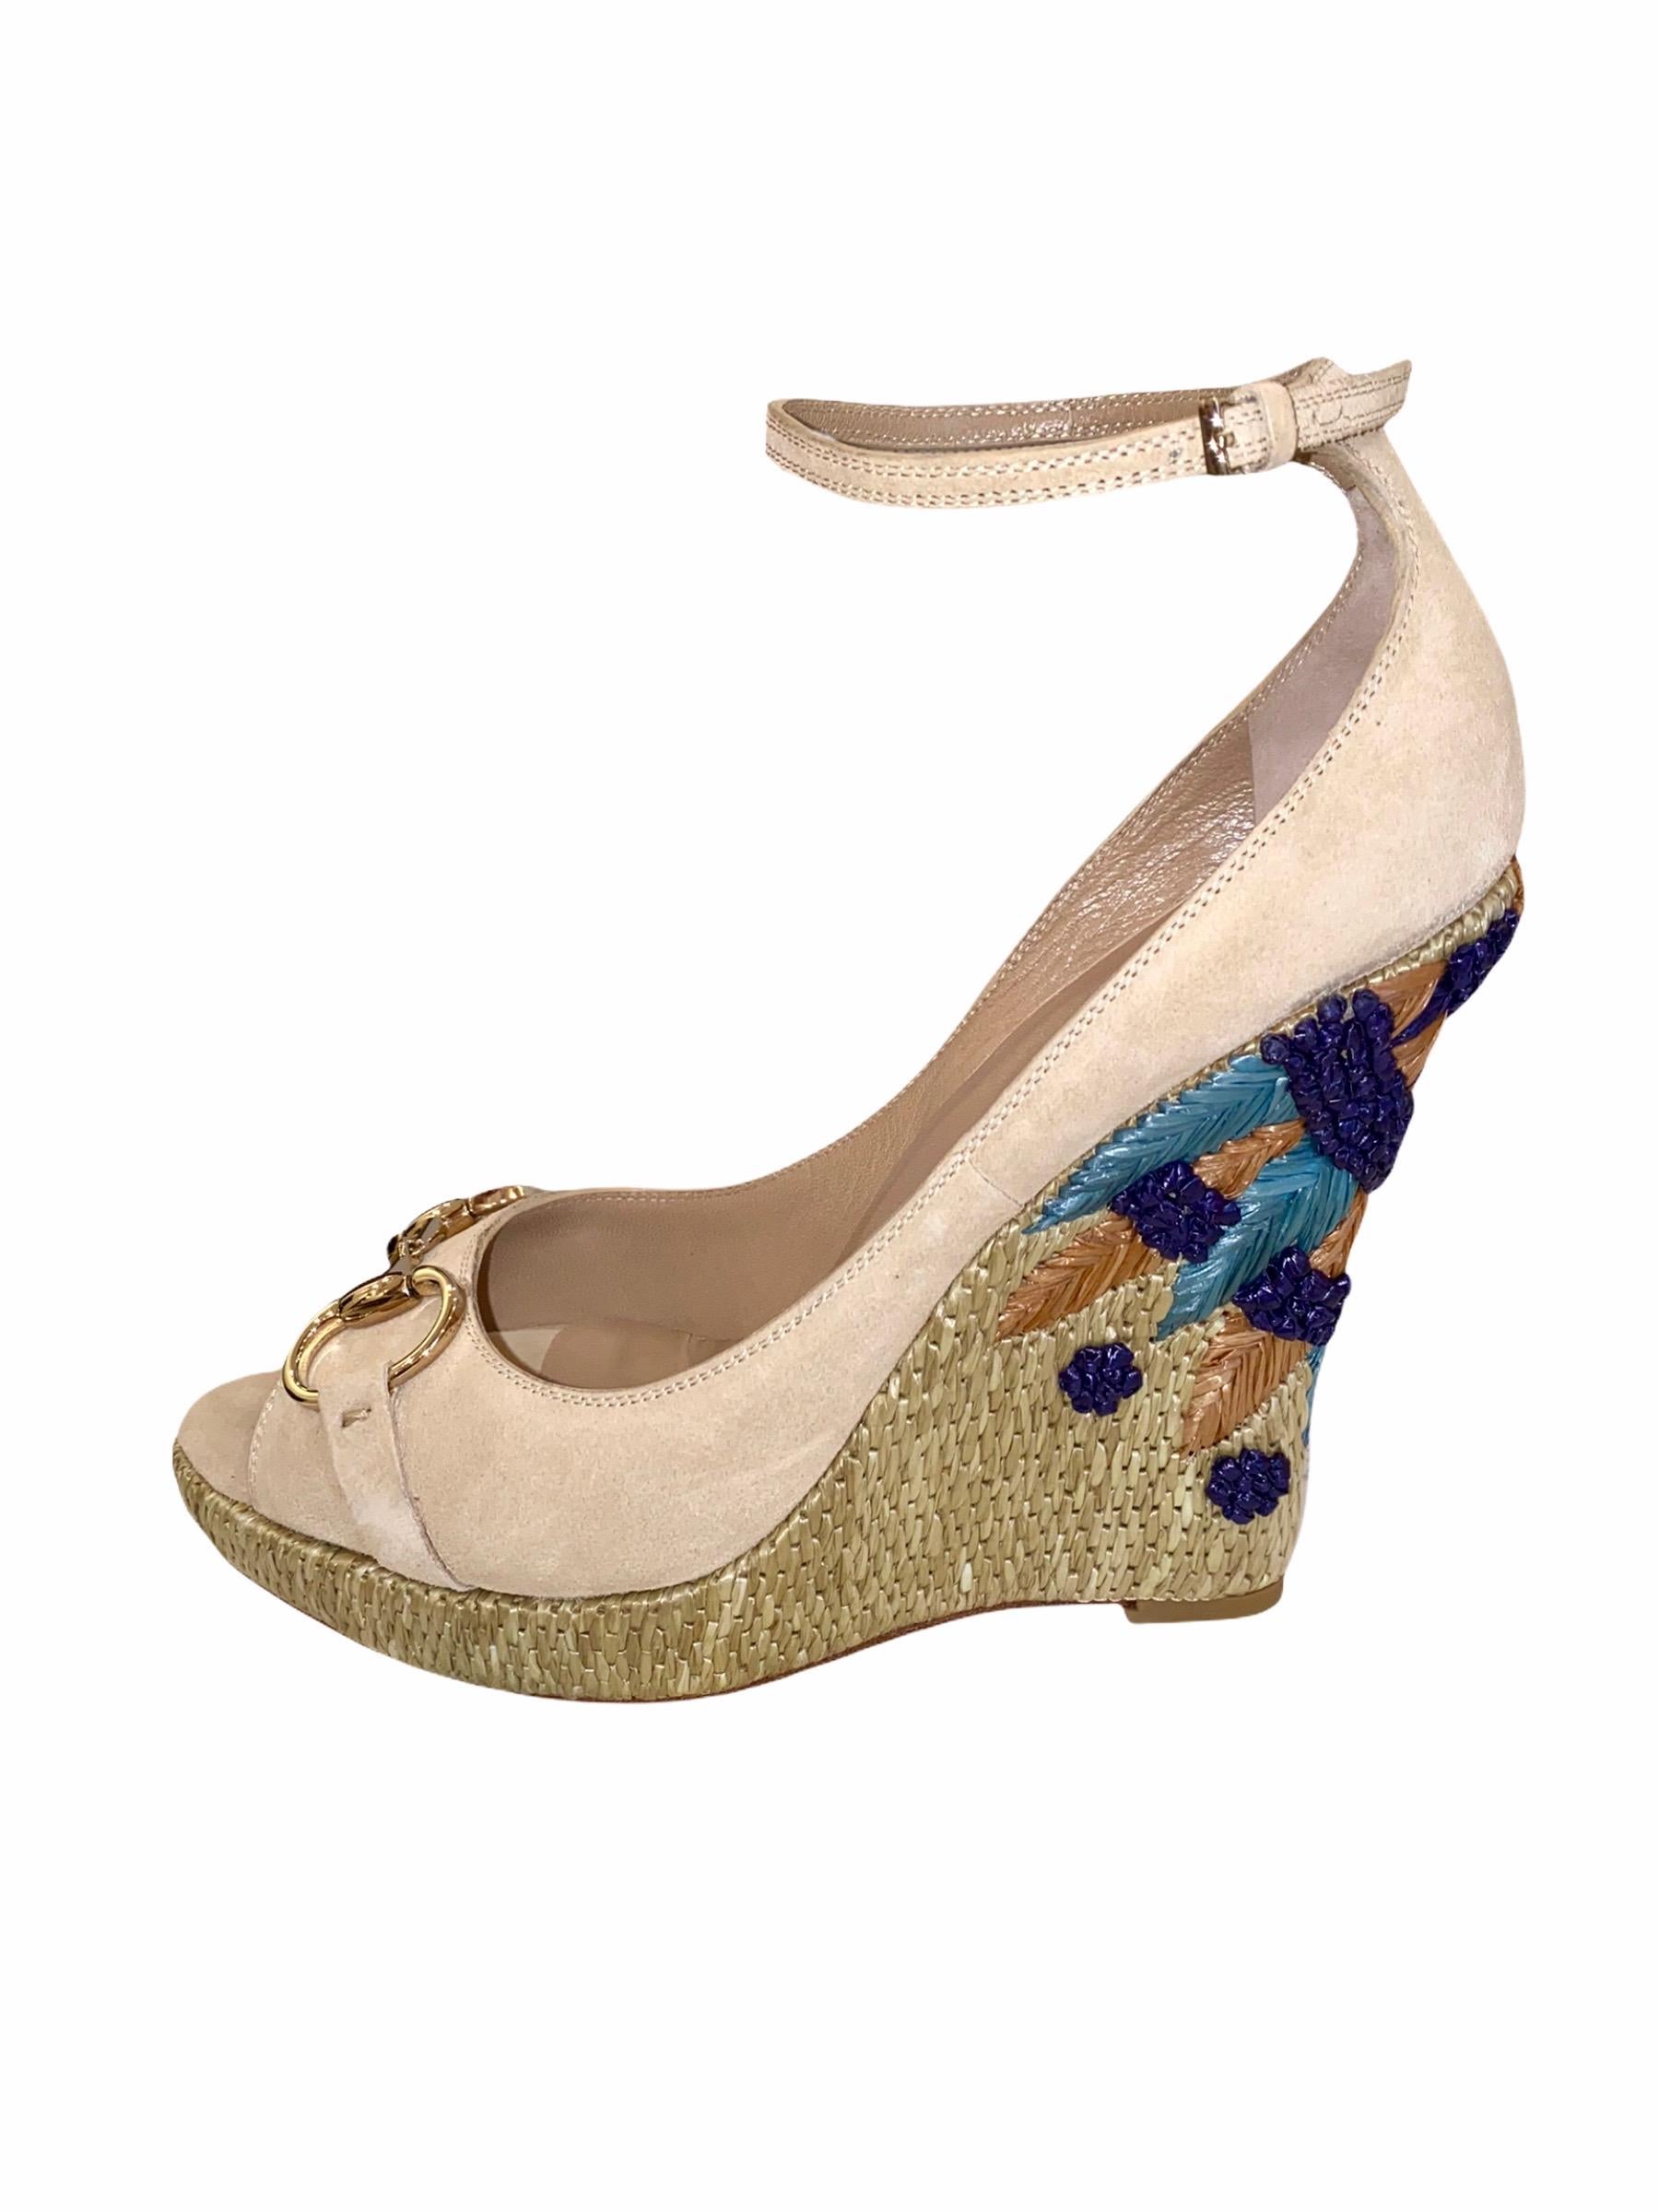 Stunning pair of Gucci suede platform wedge sandals high heels with beautiful hand-embroidered details on heels
Gucci Signature horsebit on front
Leather lined insoles
Size US 8
Brandnew and unworn, in flawless condition
Comes with Gucci dust